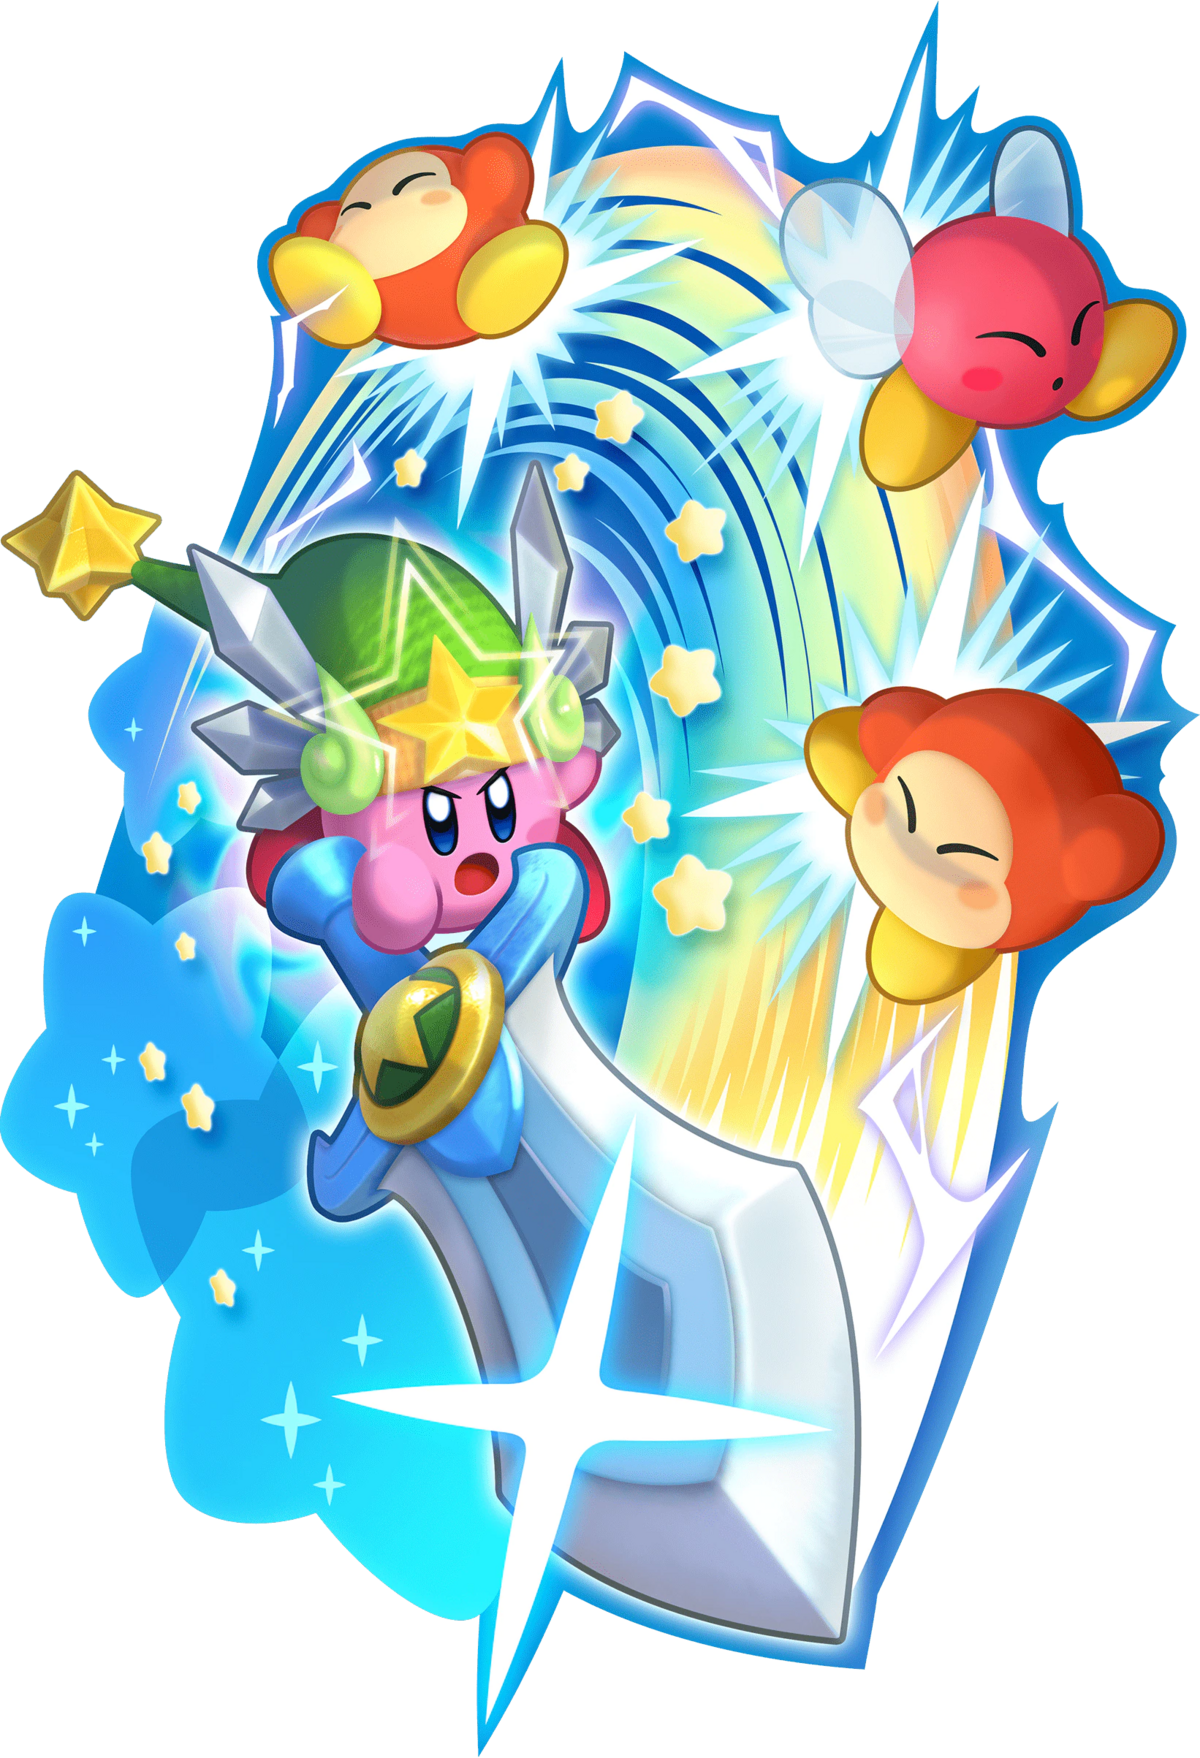 Chilly - WiKirby: it's a wiki, about Kirby!